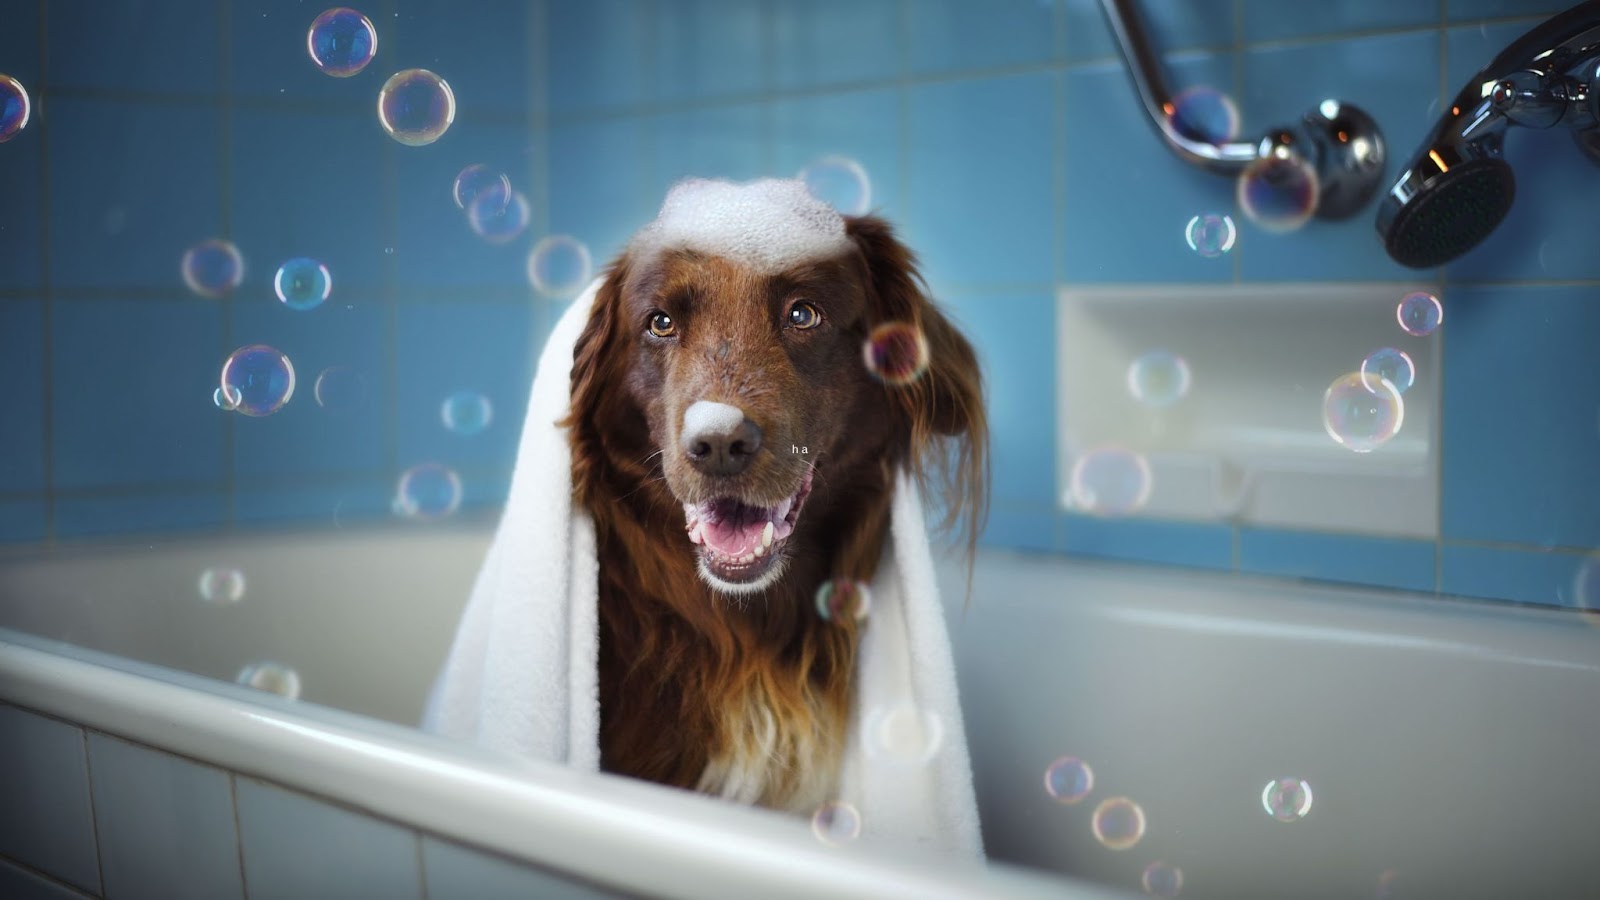 long-haired brown dog having a bath with bubbles